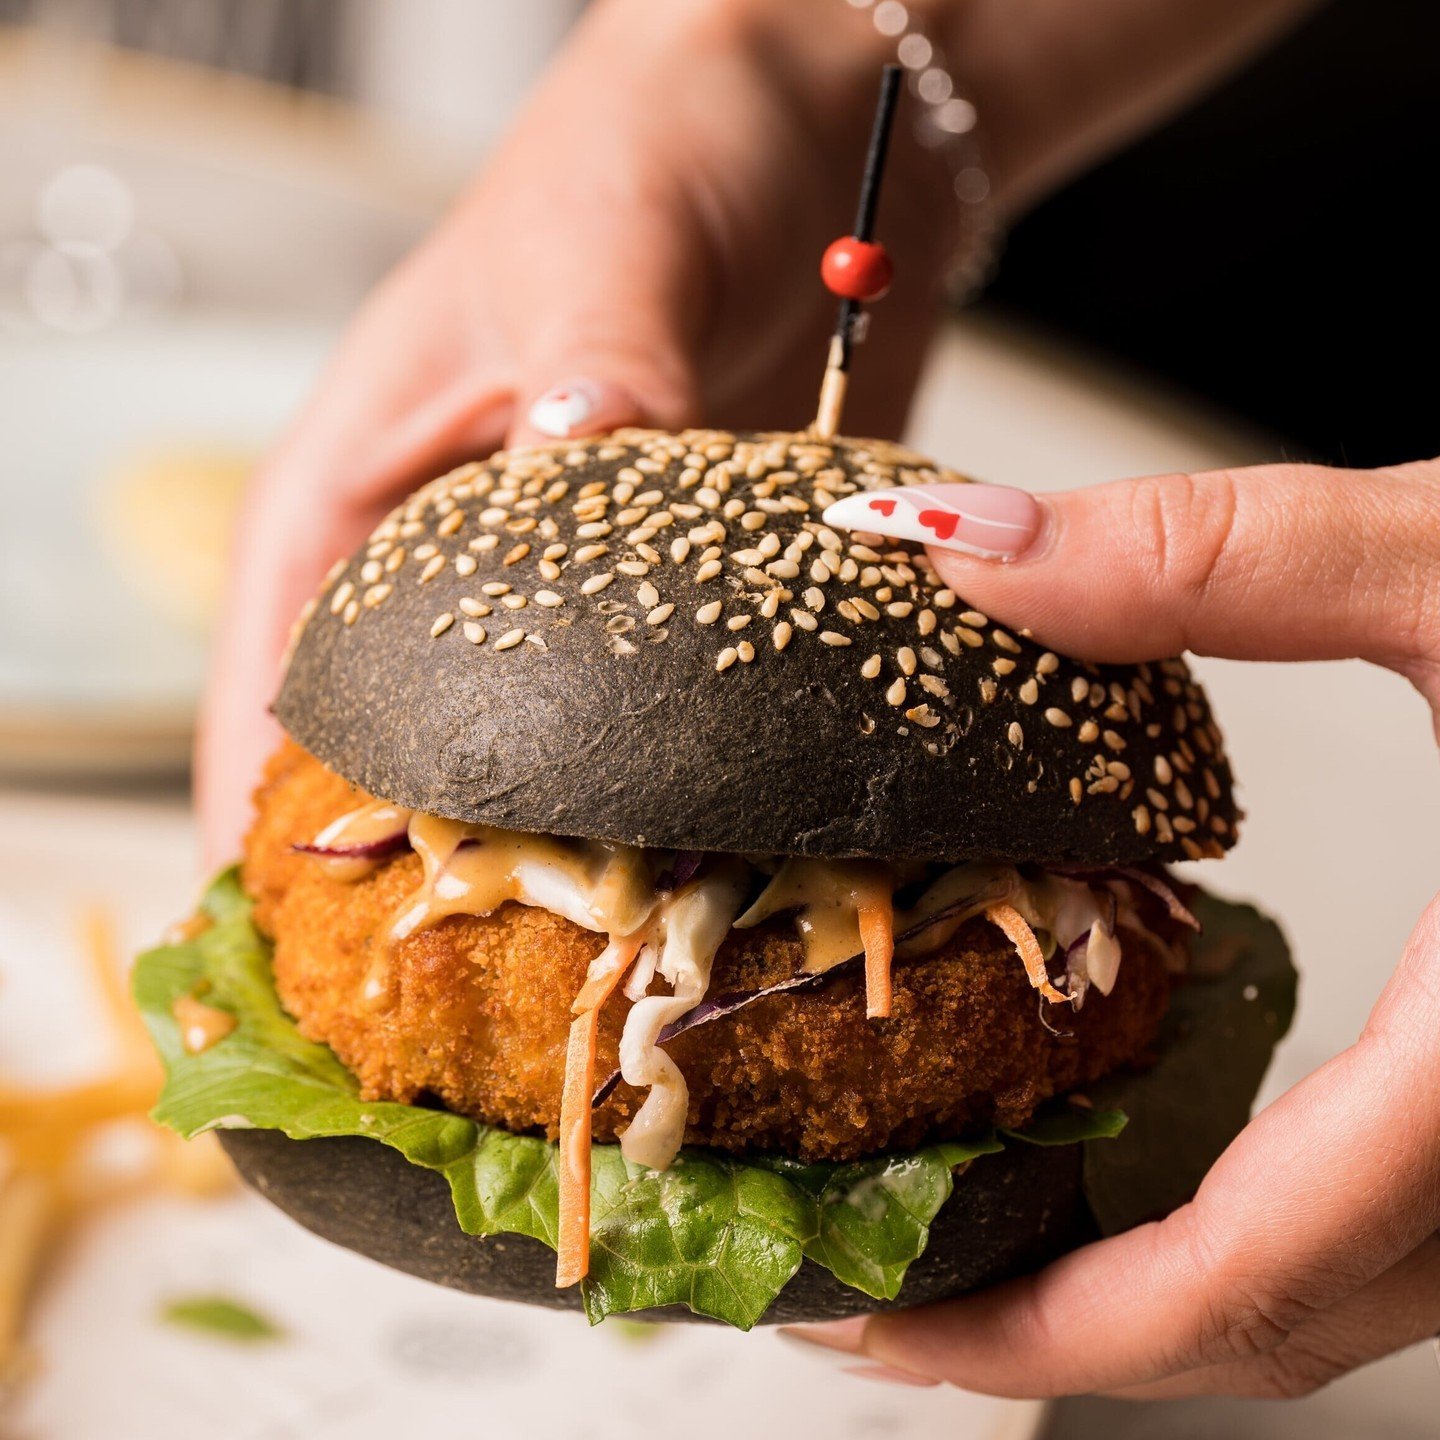 Can't decide between fish or a burger? Get our new Panko Prawn Burger 🍔🐟 

Panko prawn patty, lettuce, slaw, pickles, special sauce, charcoal bun - it's oh, so finger lickin' good!